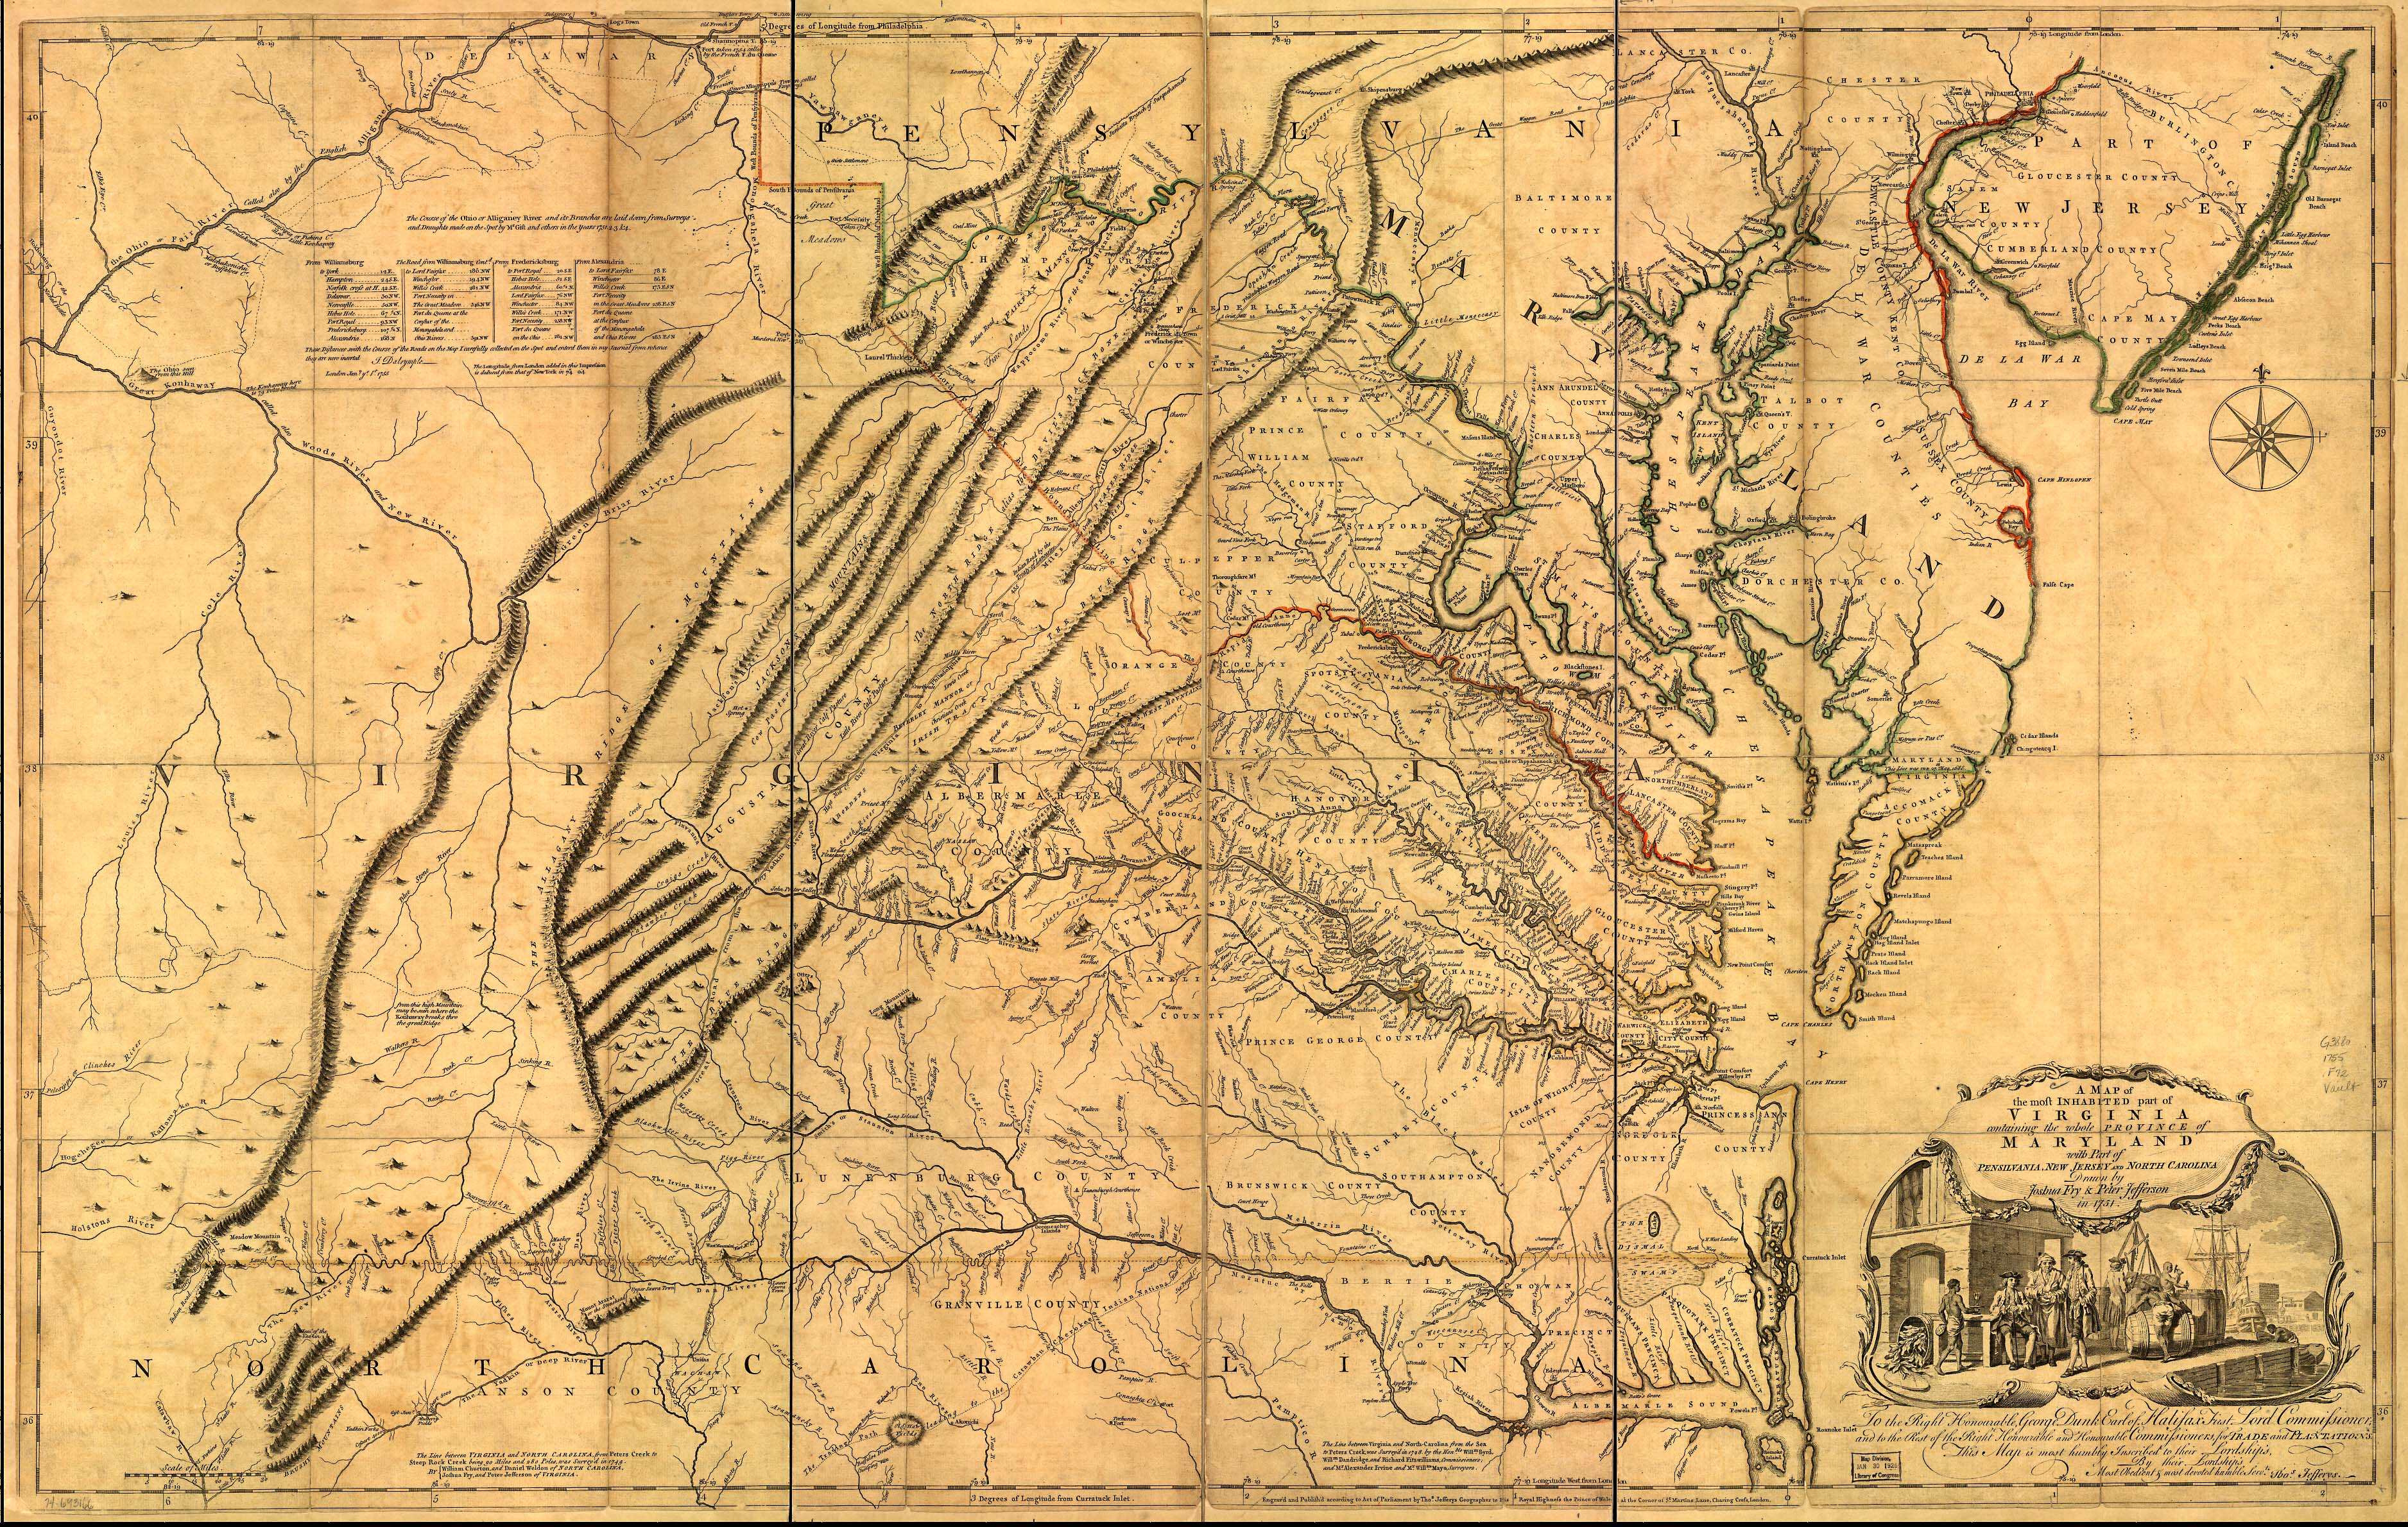 Virginia 1794 - Look closely at the Amherst Co. area and you see both 